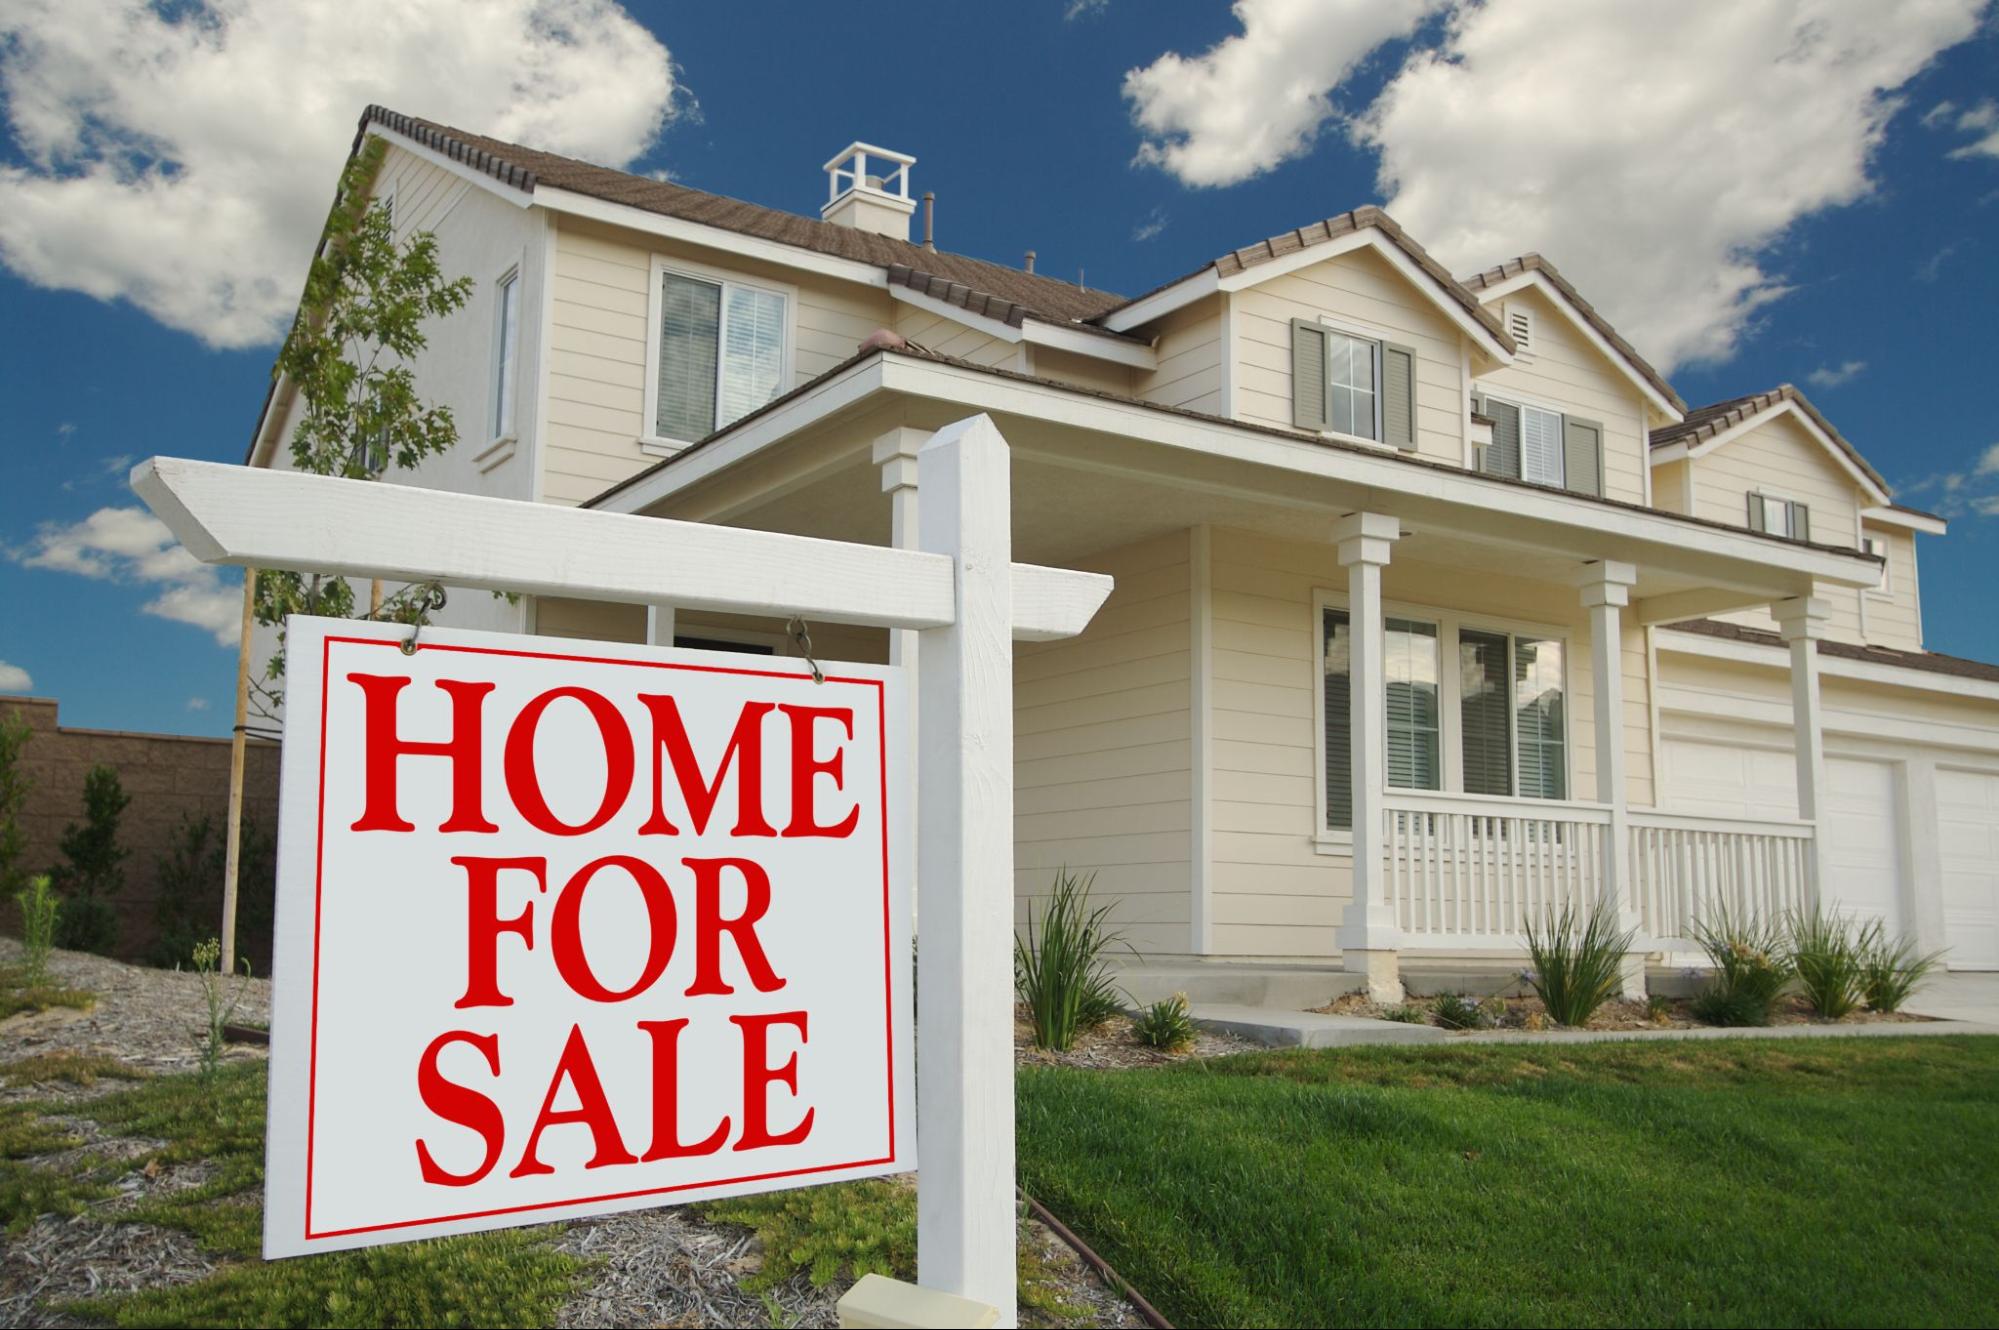 Can I Sell My House With a Tax Lien?